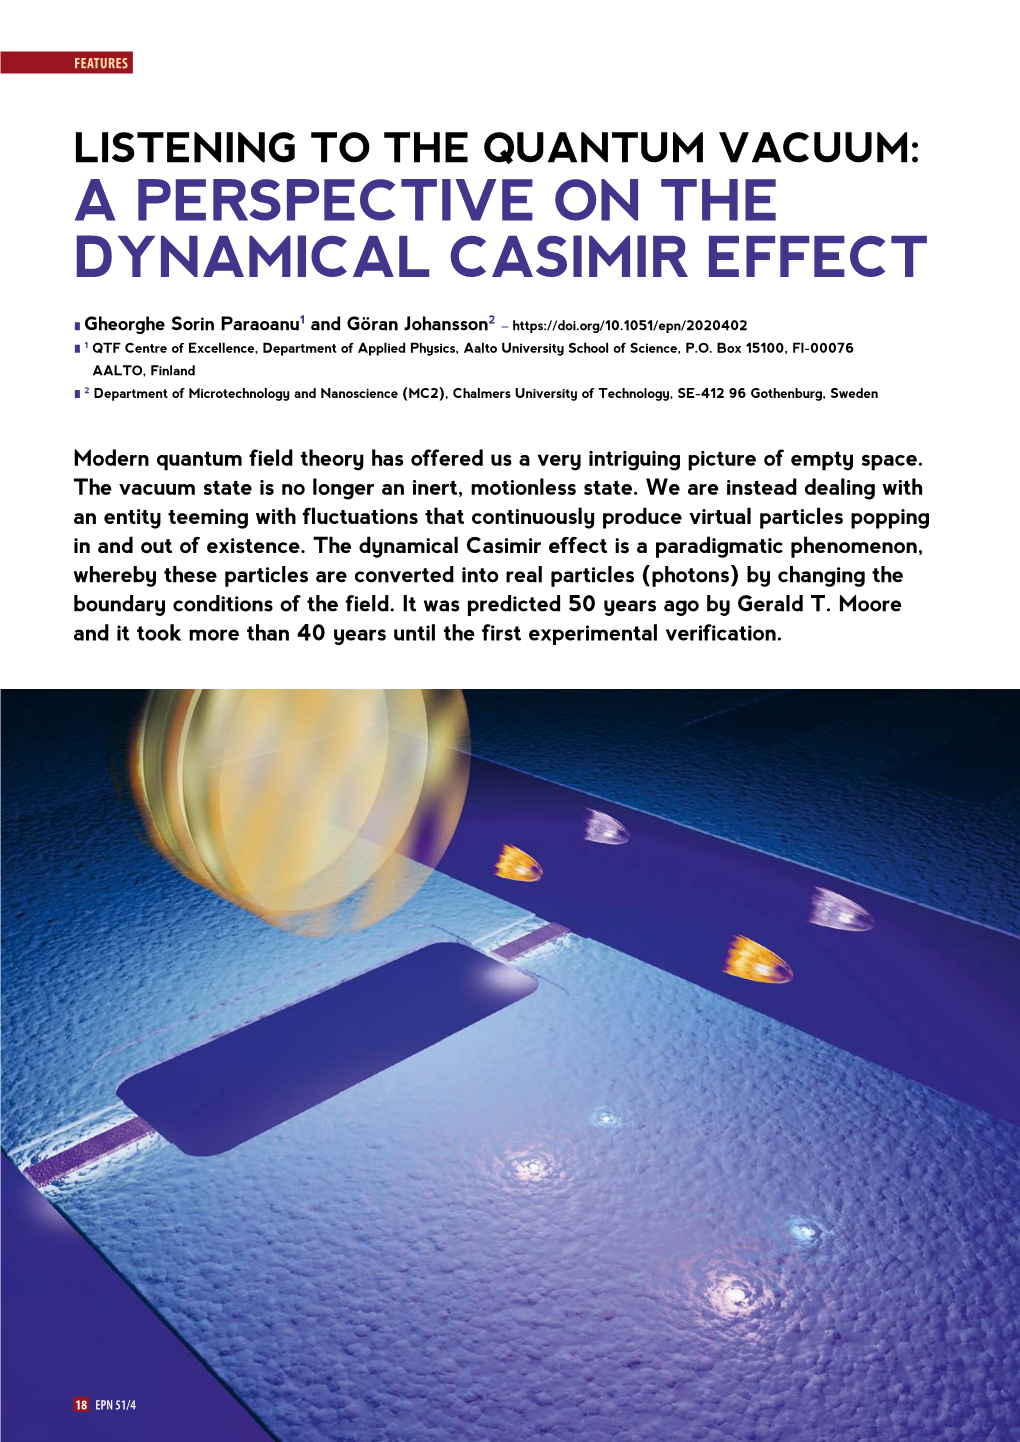 Listening to the Quantum Vacuum: a Perspective on the Dynamical Casimir Effect